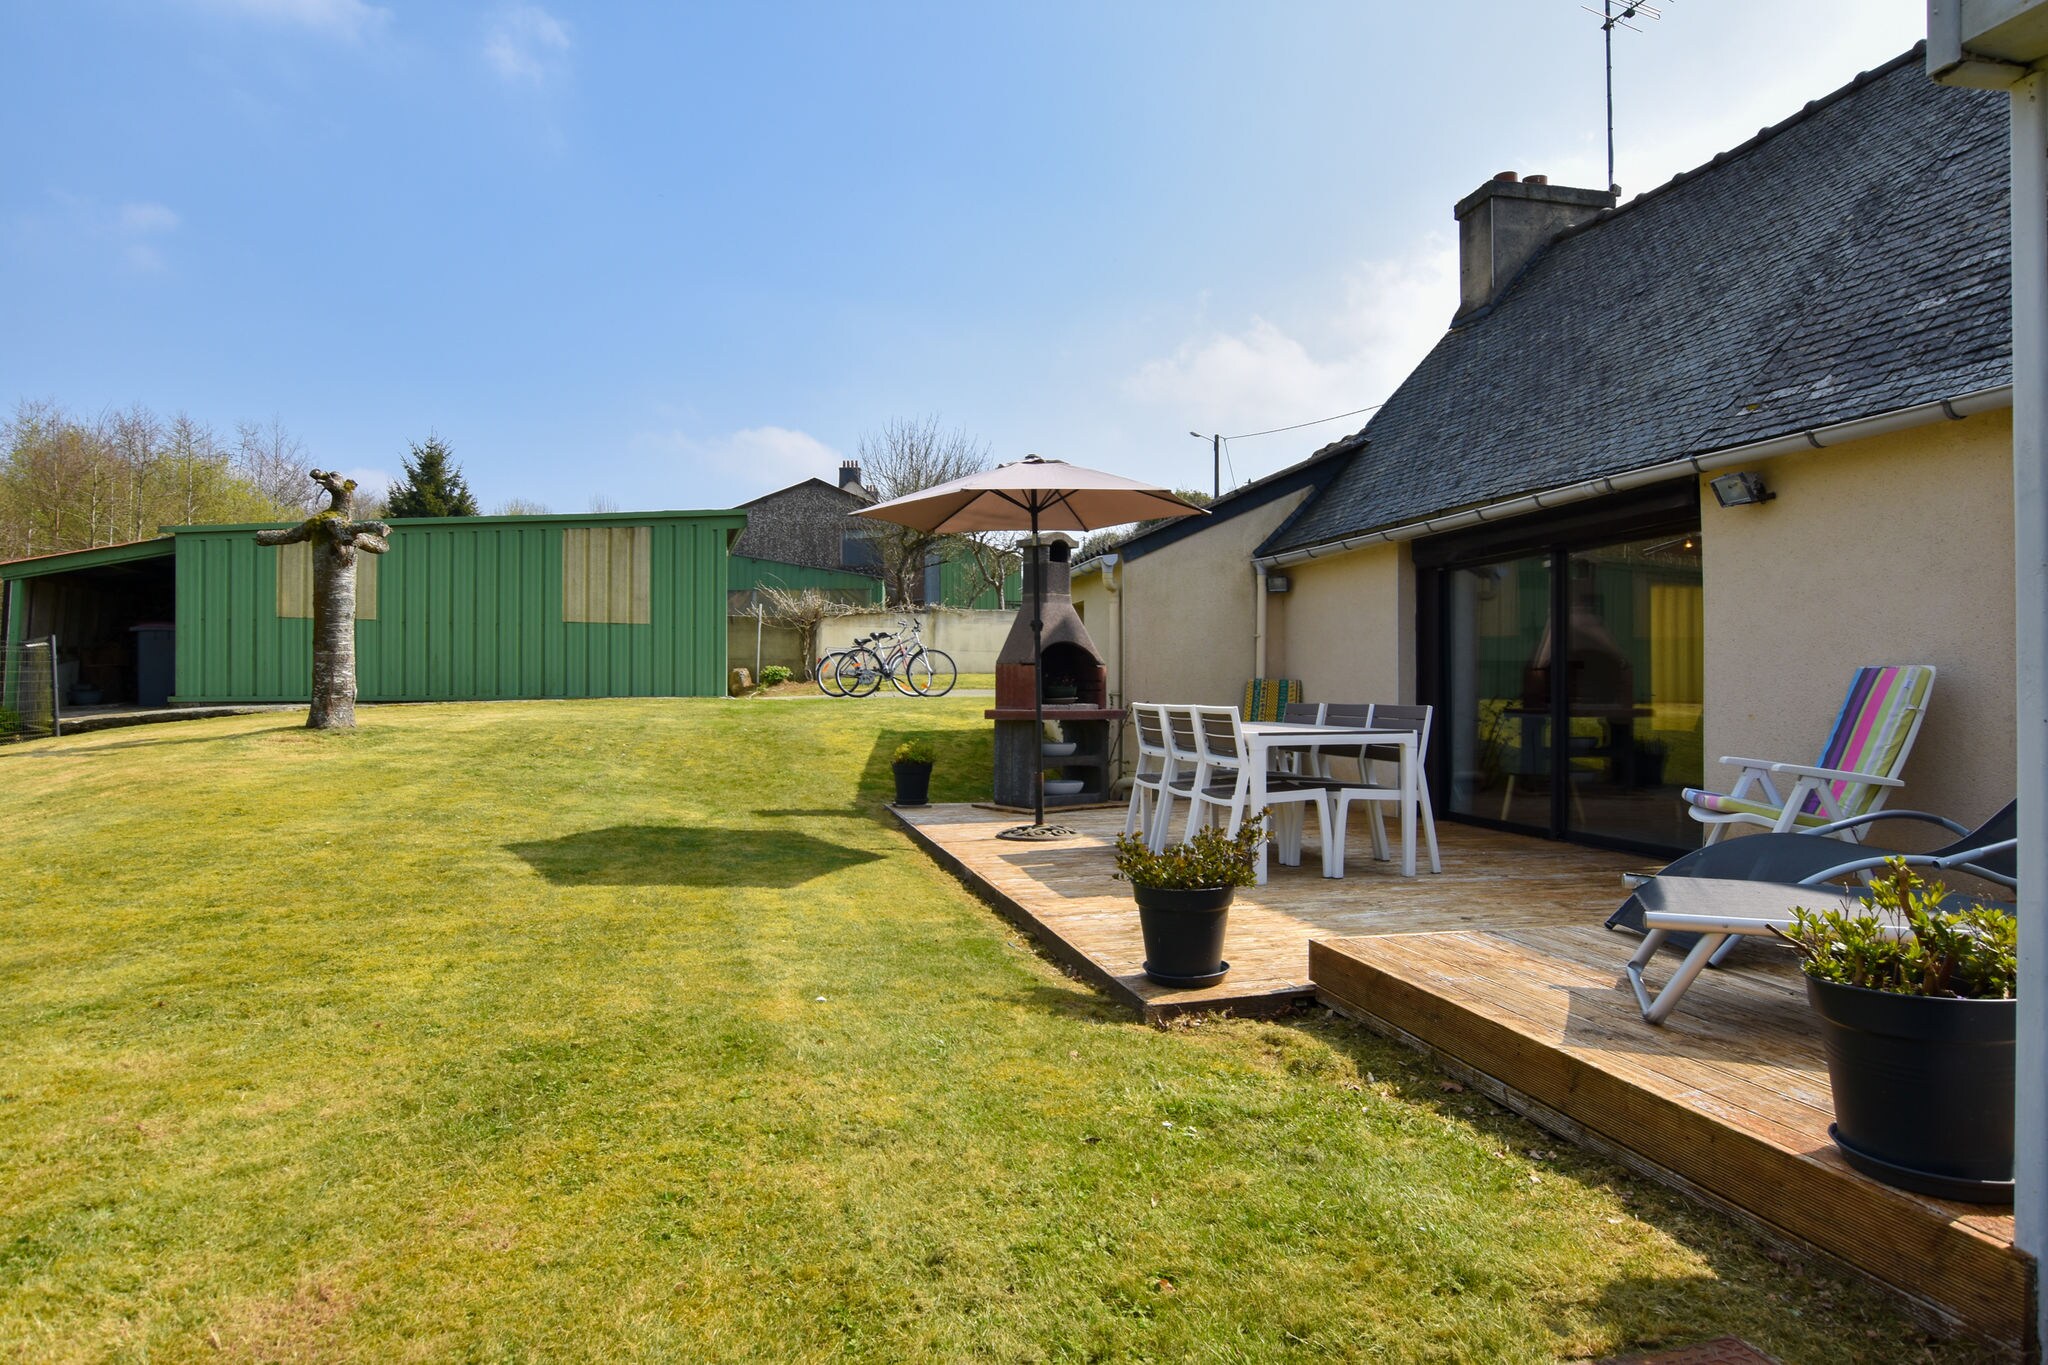 Holiday house with large fenced garden 30min from the beautiful Breton beaches.